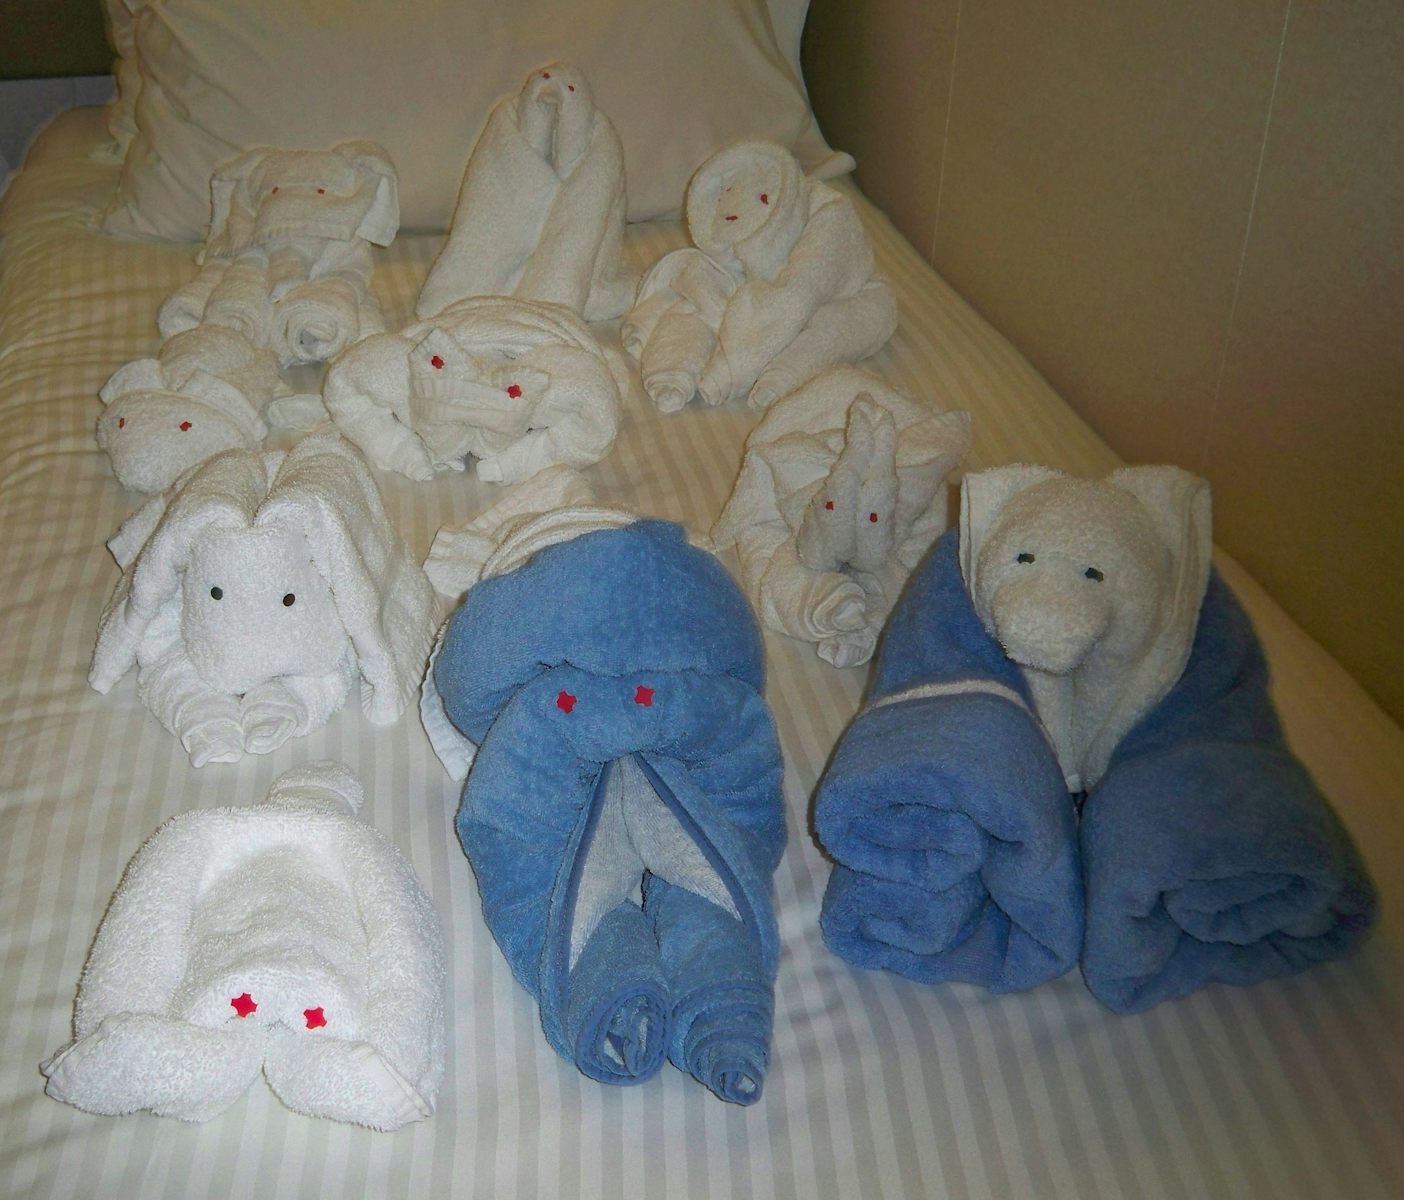 Some of animals made with towels.